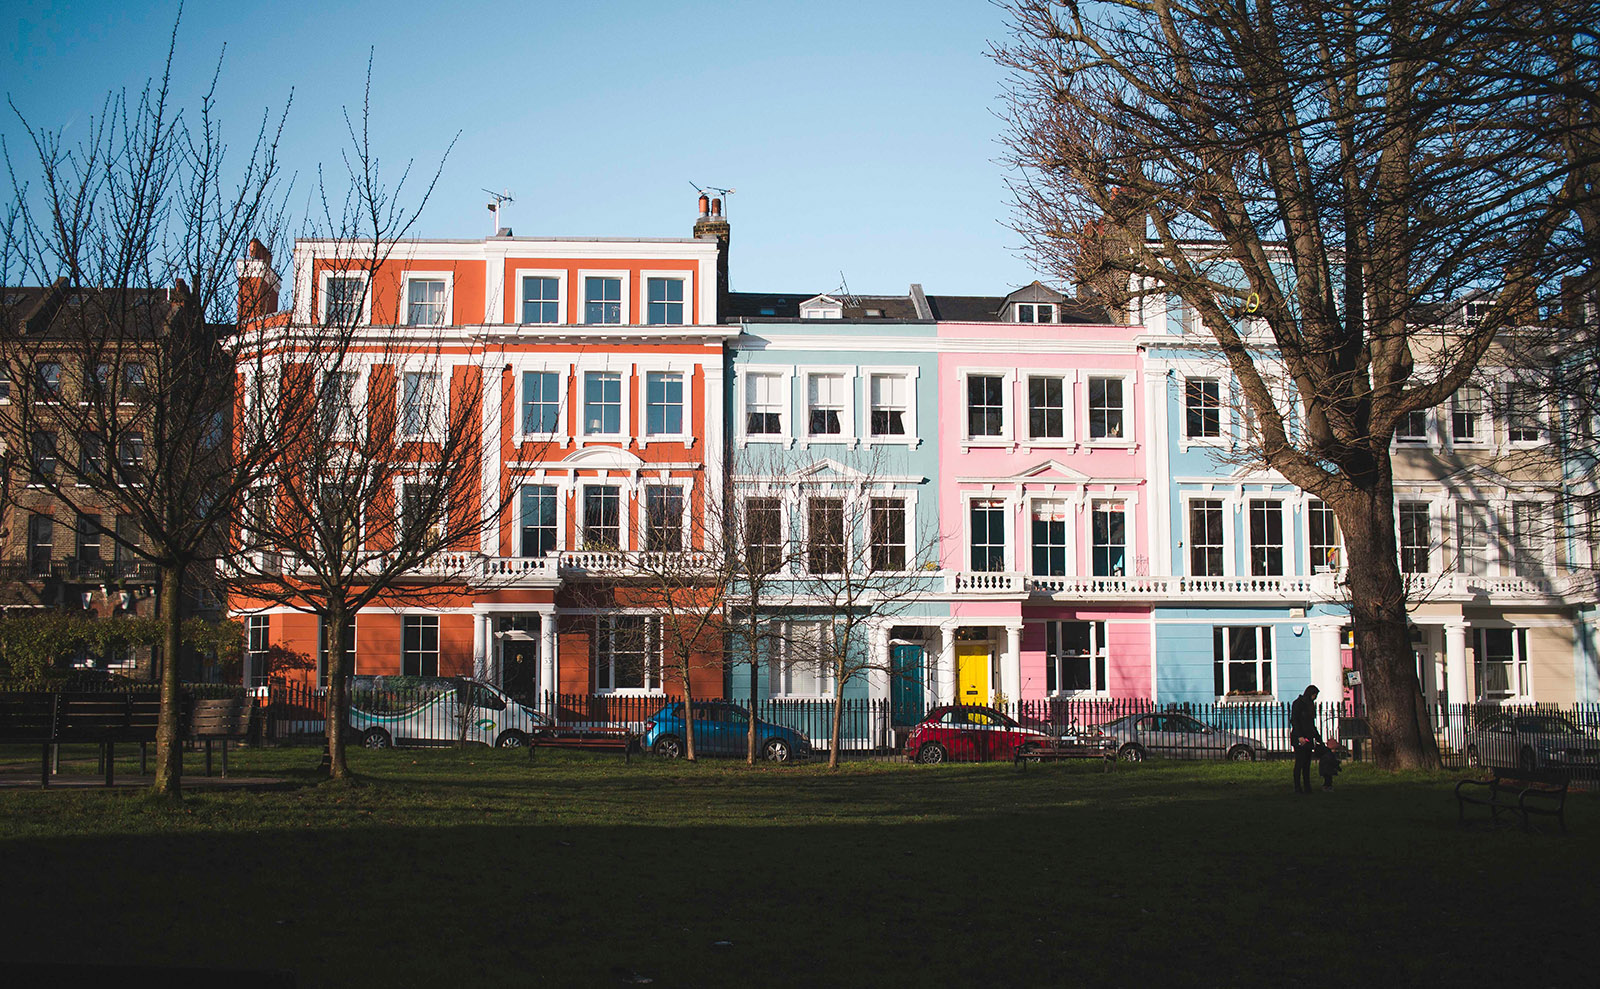 pastel-colored houses in the primrose hill neighborhood of london